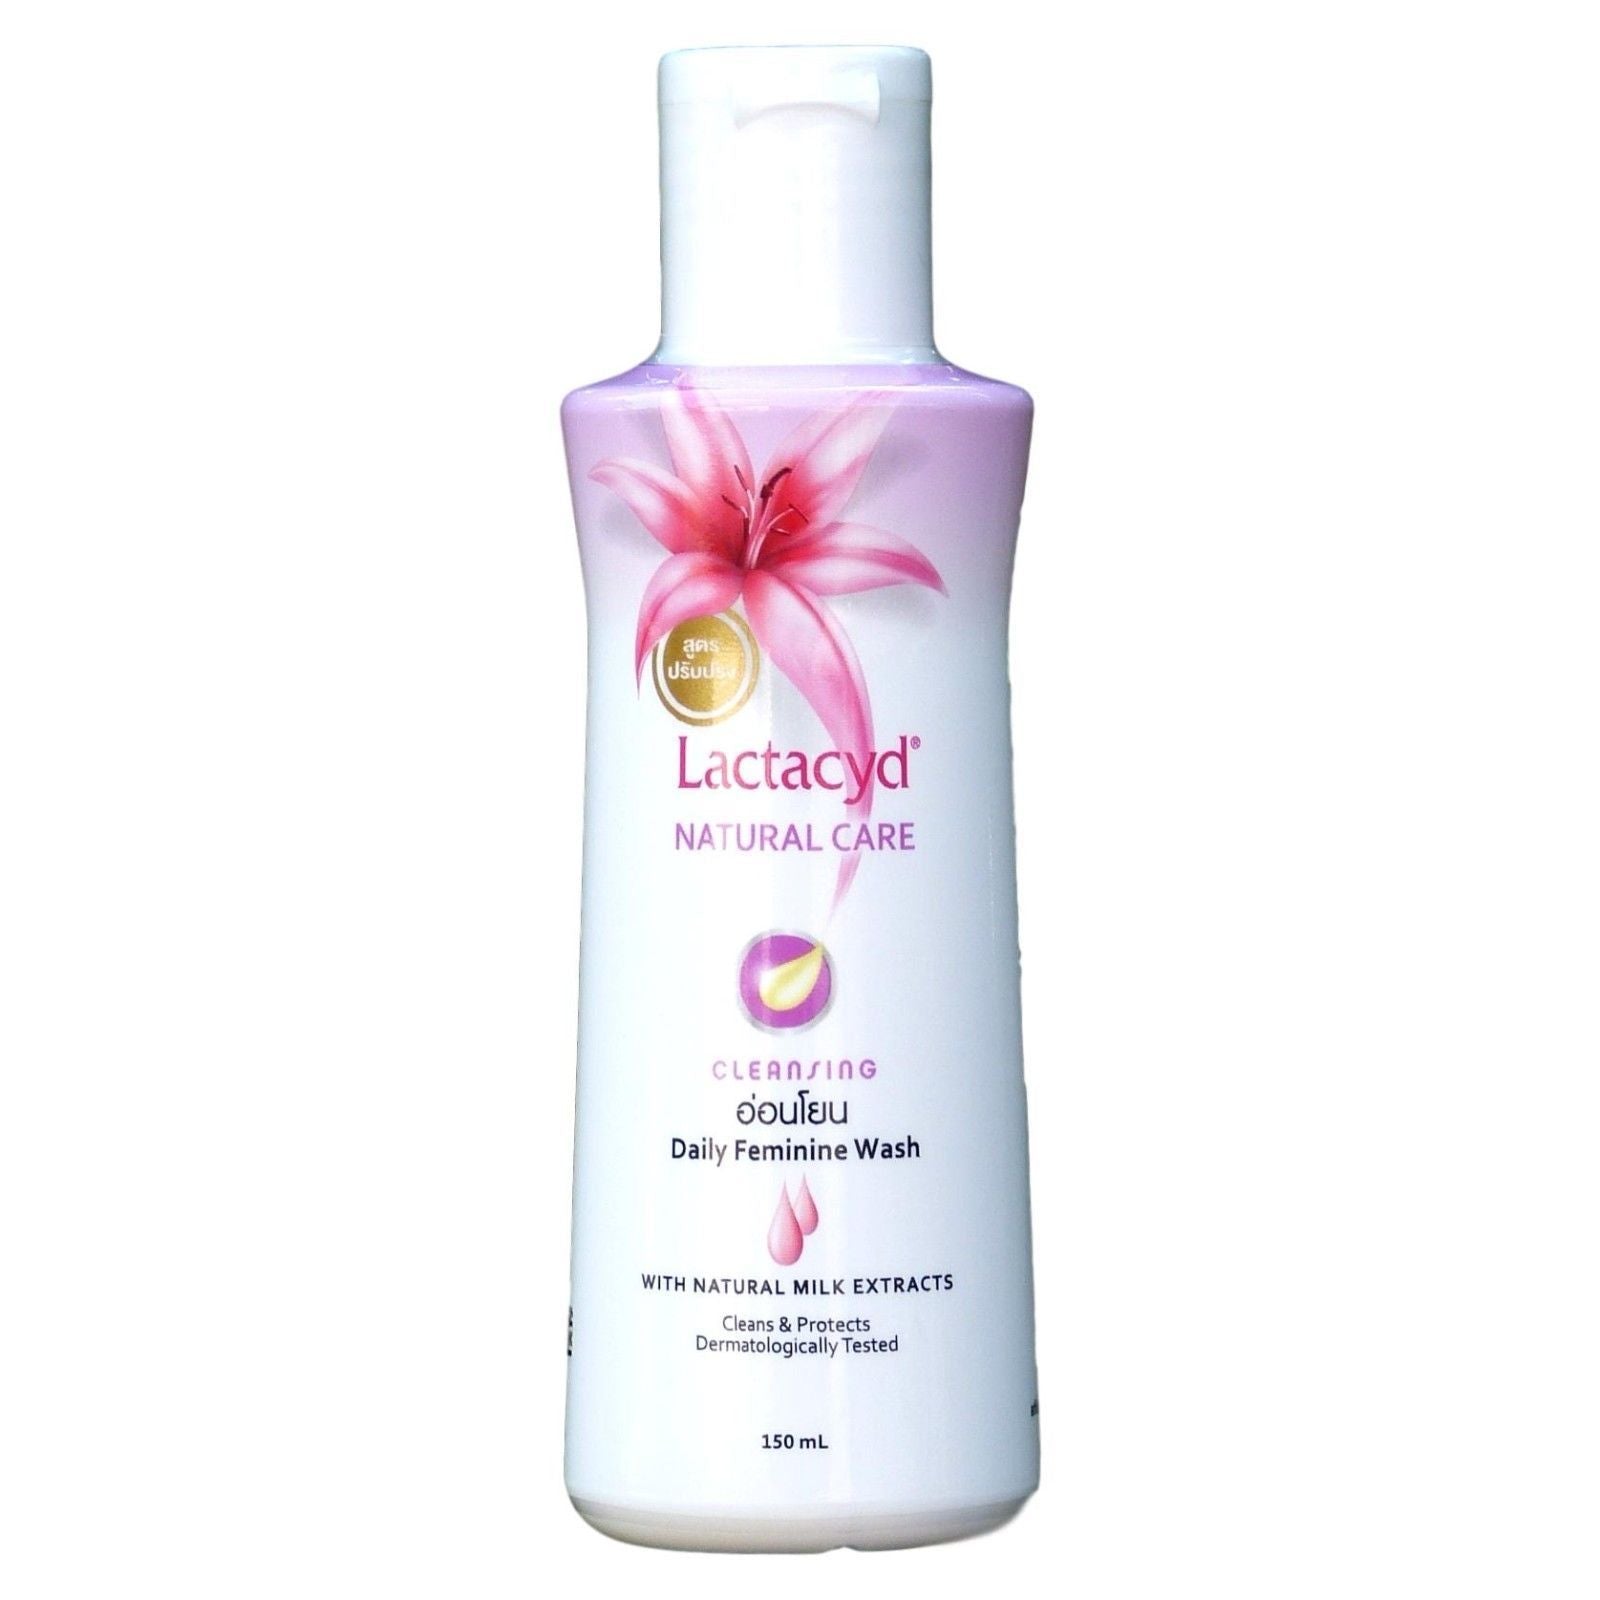 Lactacyd Natural Care Cleansing Feminine Wash with Natural Milk Extracts 150ml - Asian Beauty Supply